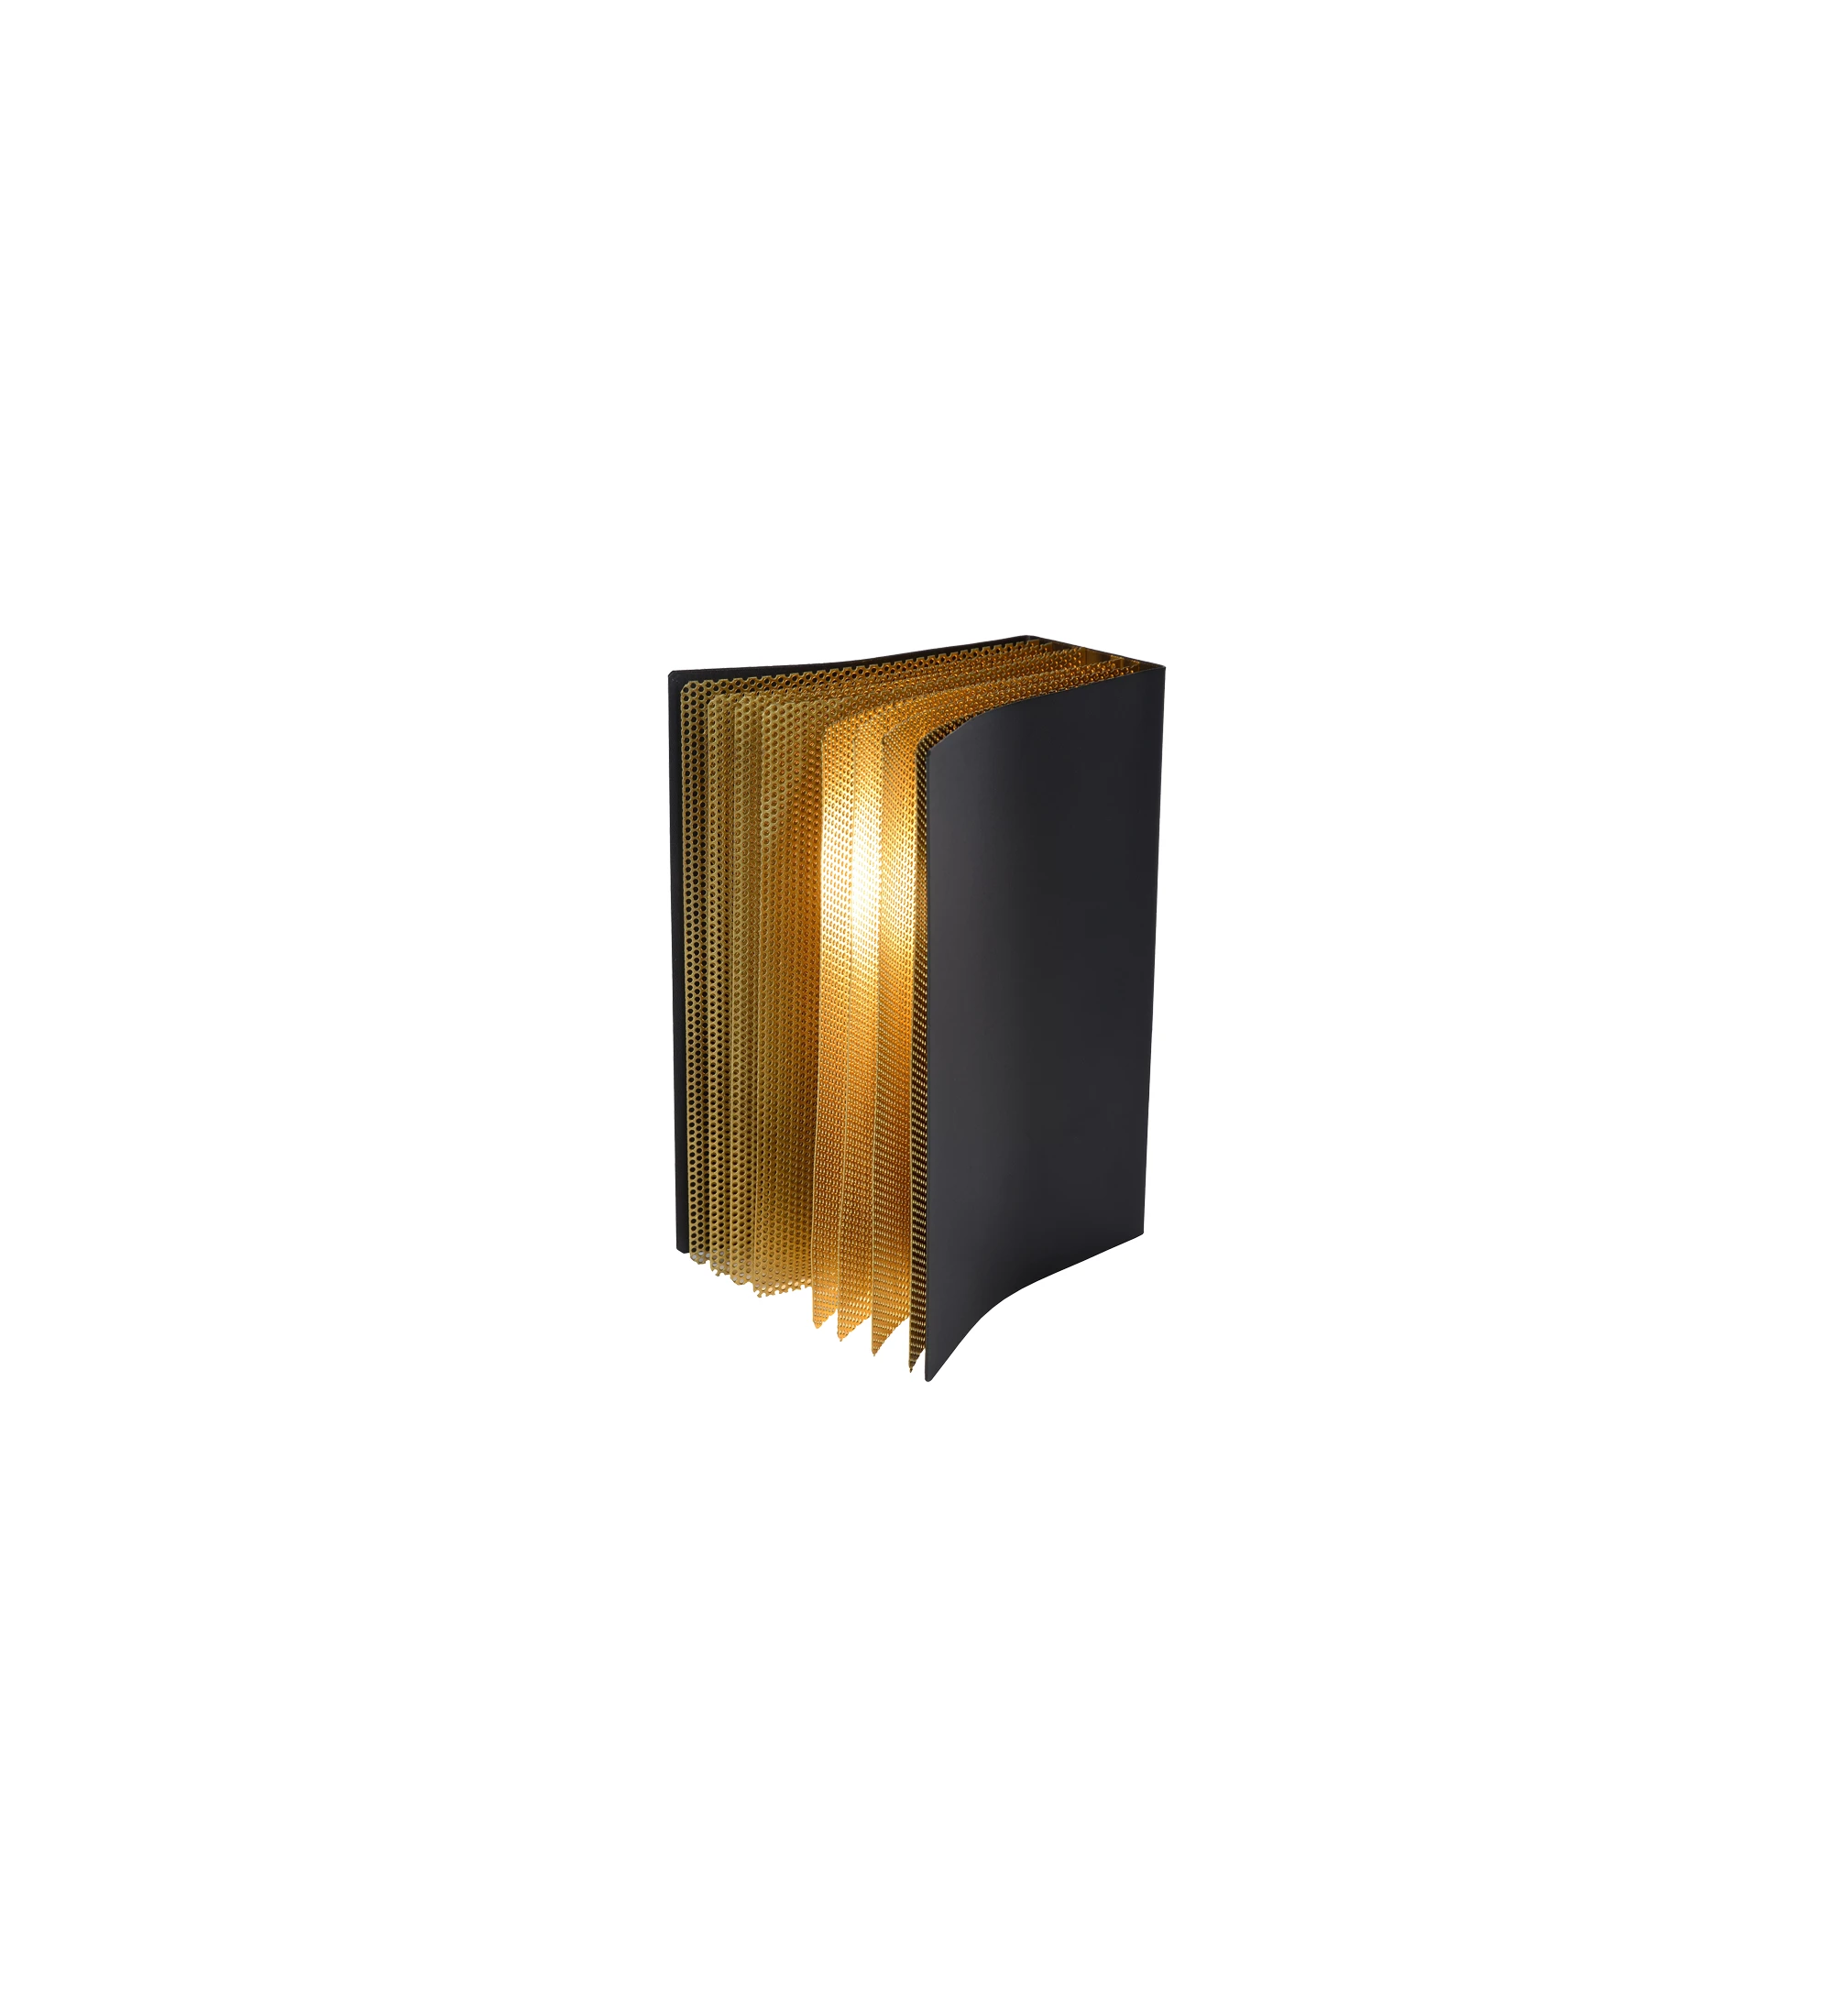 Table lamp in black and gold metal.